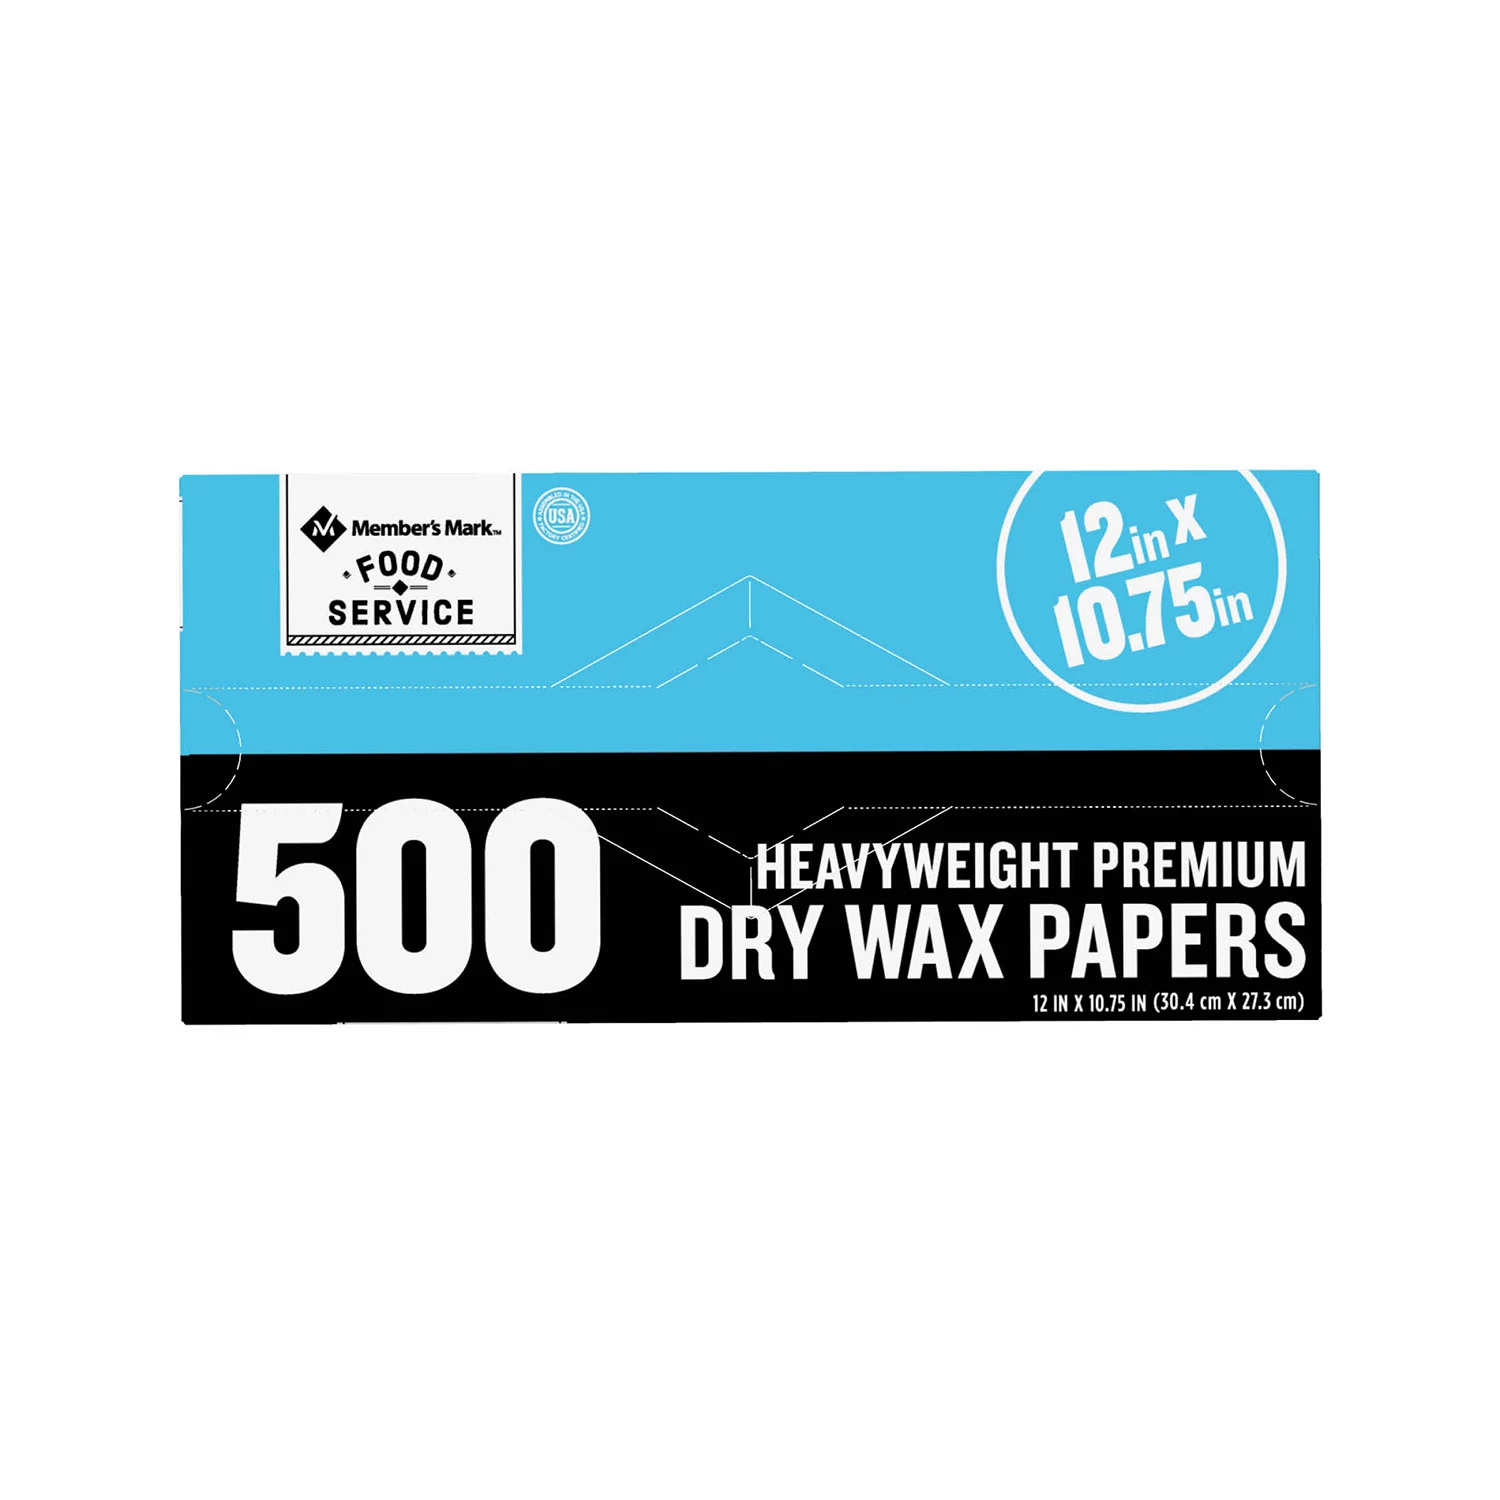   Member’s Mark Heavyweight Wax Papers